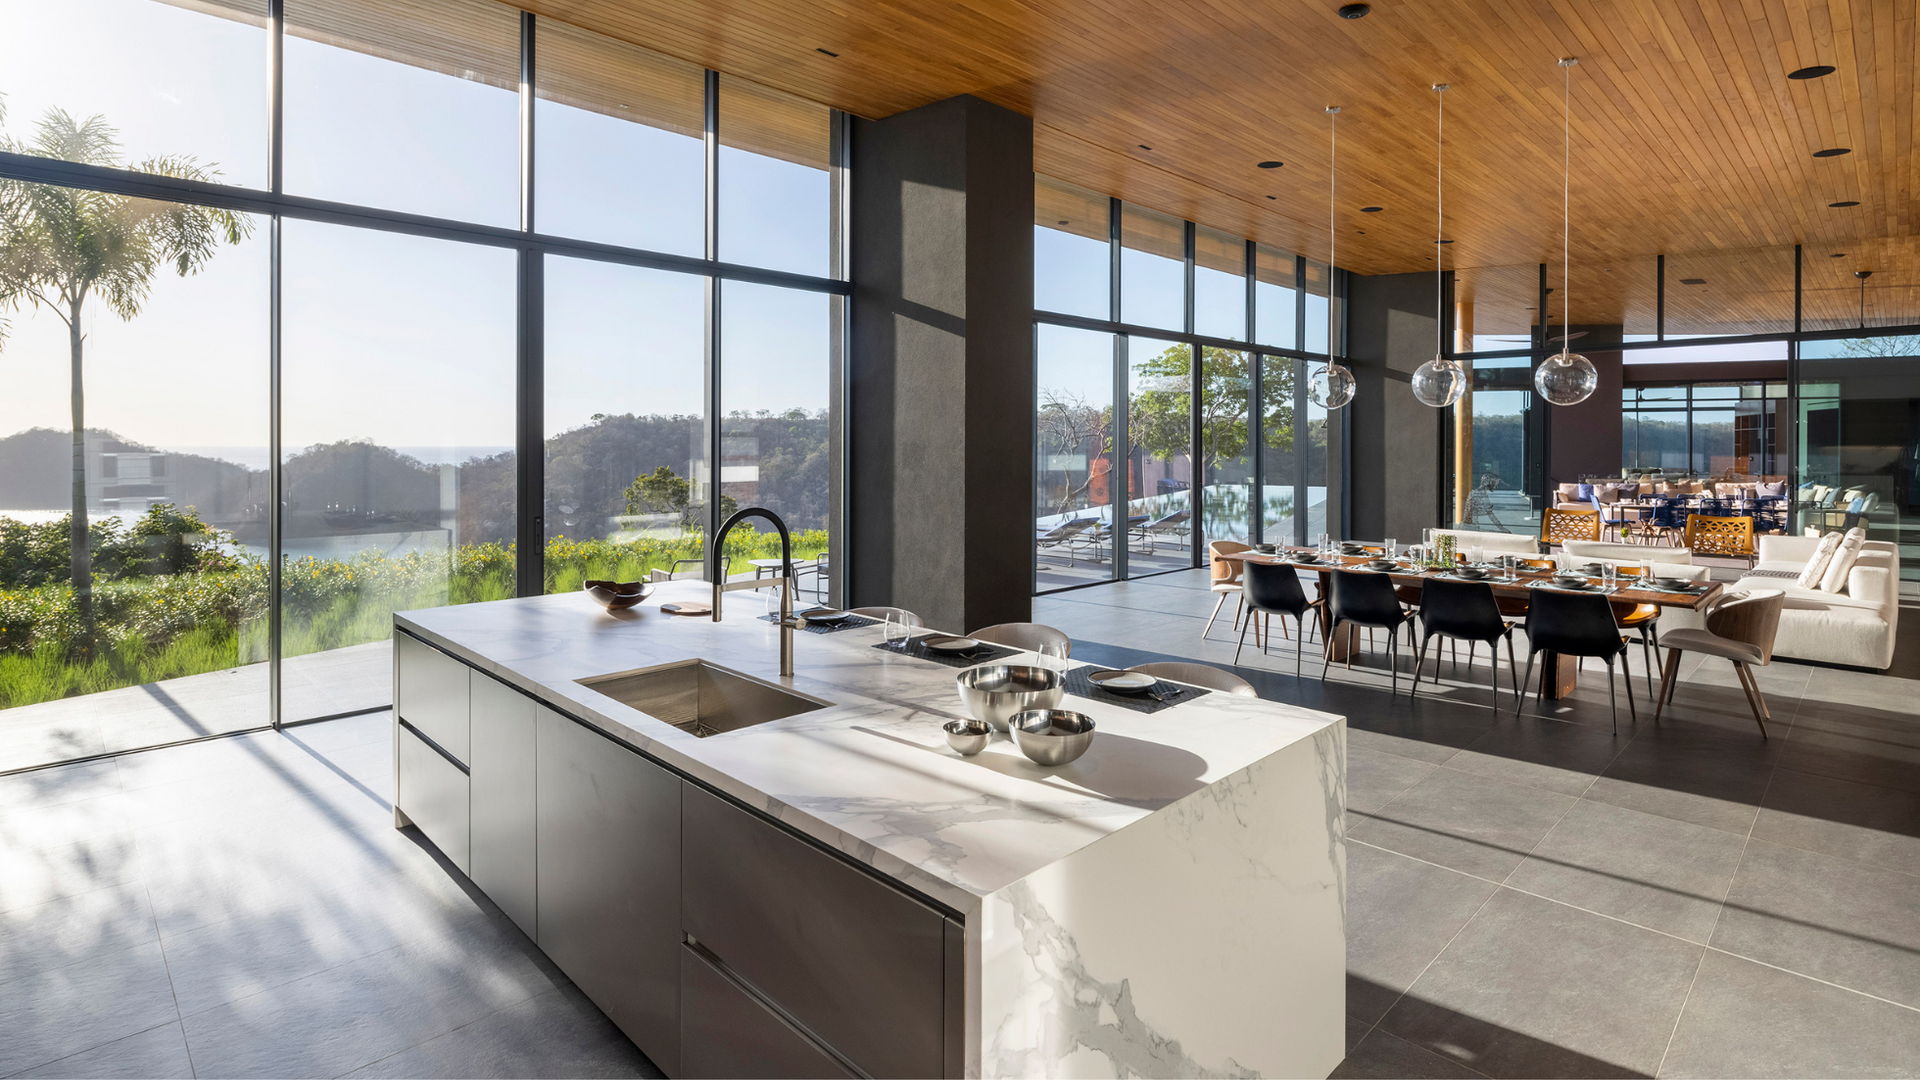 A kitchen with a large island in the middle of it and a lot of windows.